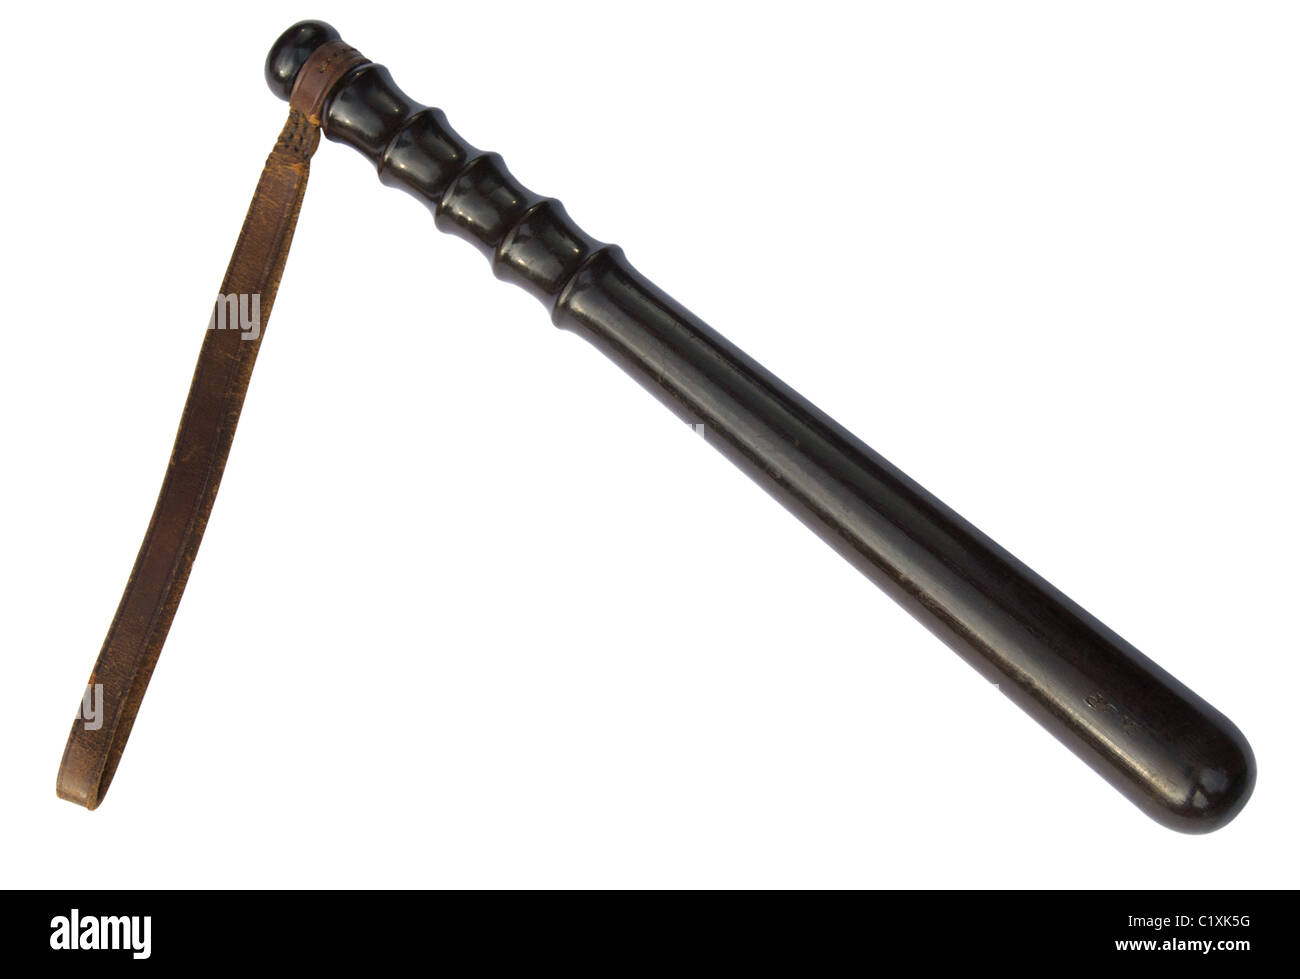 Wooden truncheon with leather strap, c. 1940s (cutout) Stock Photo